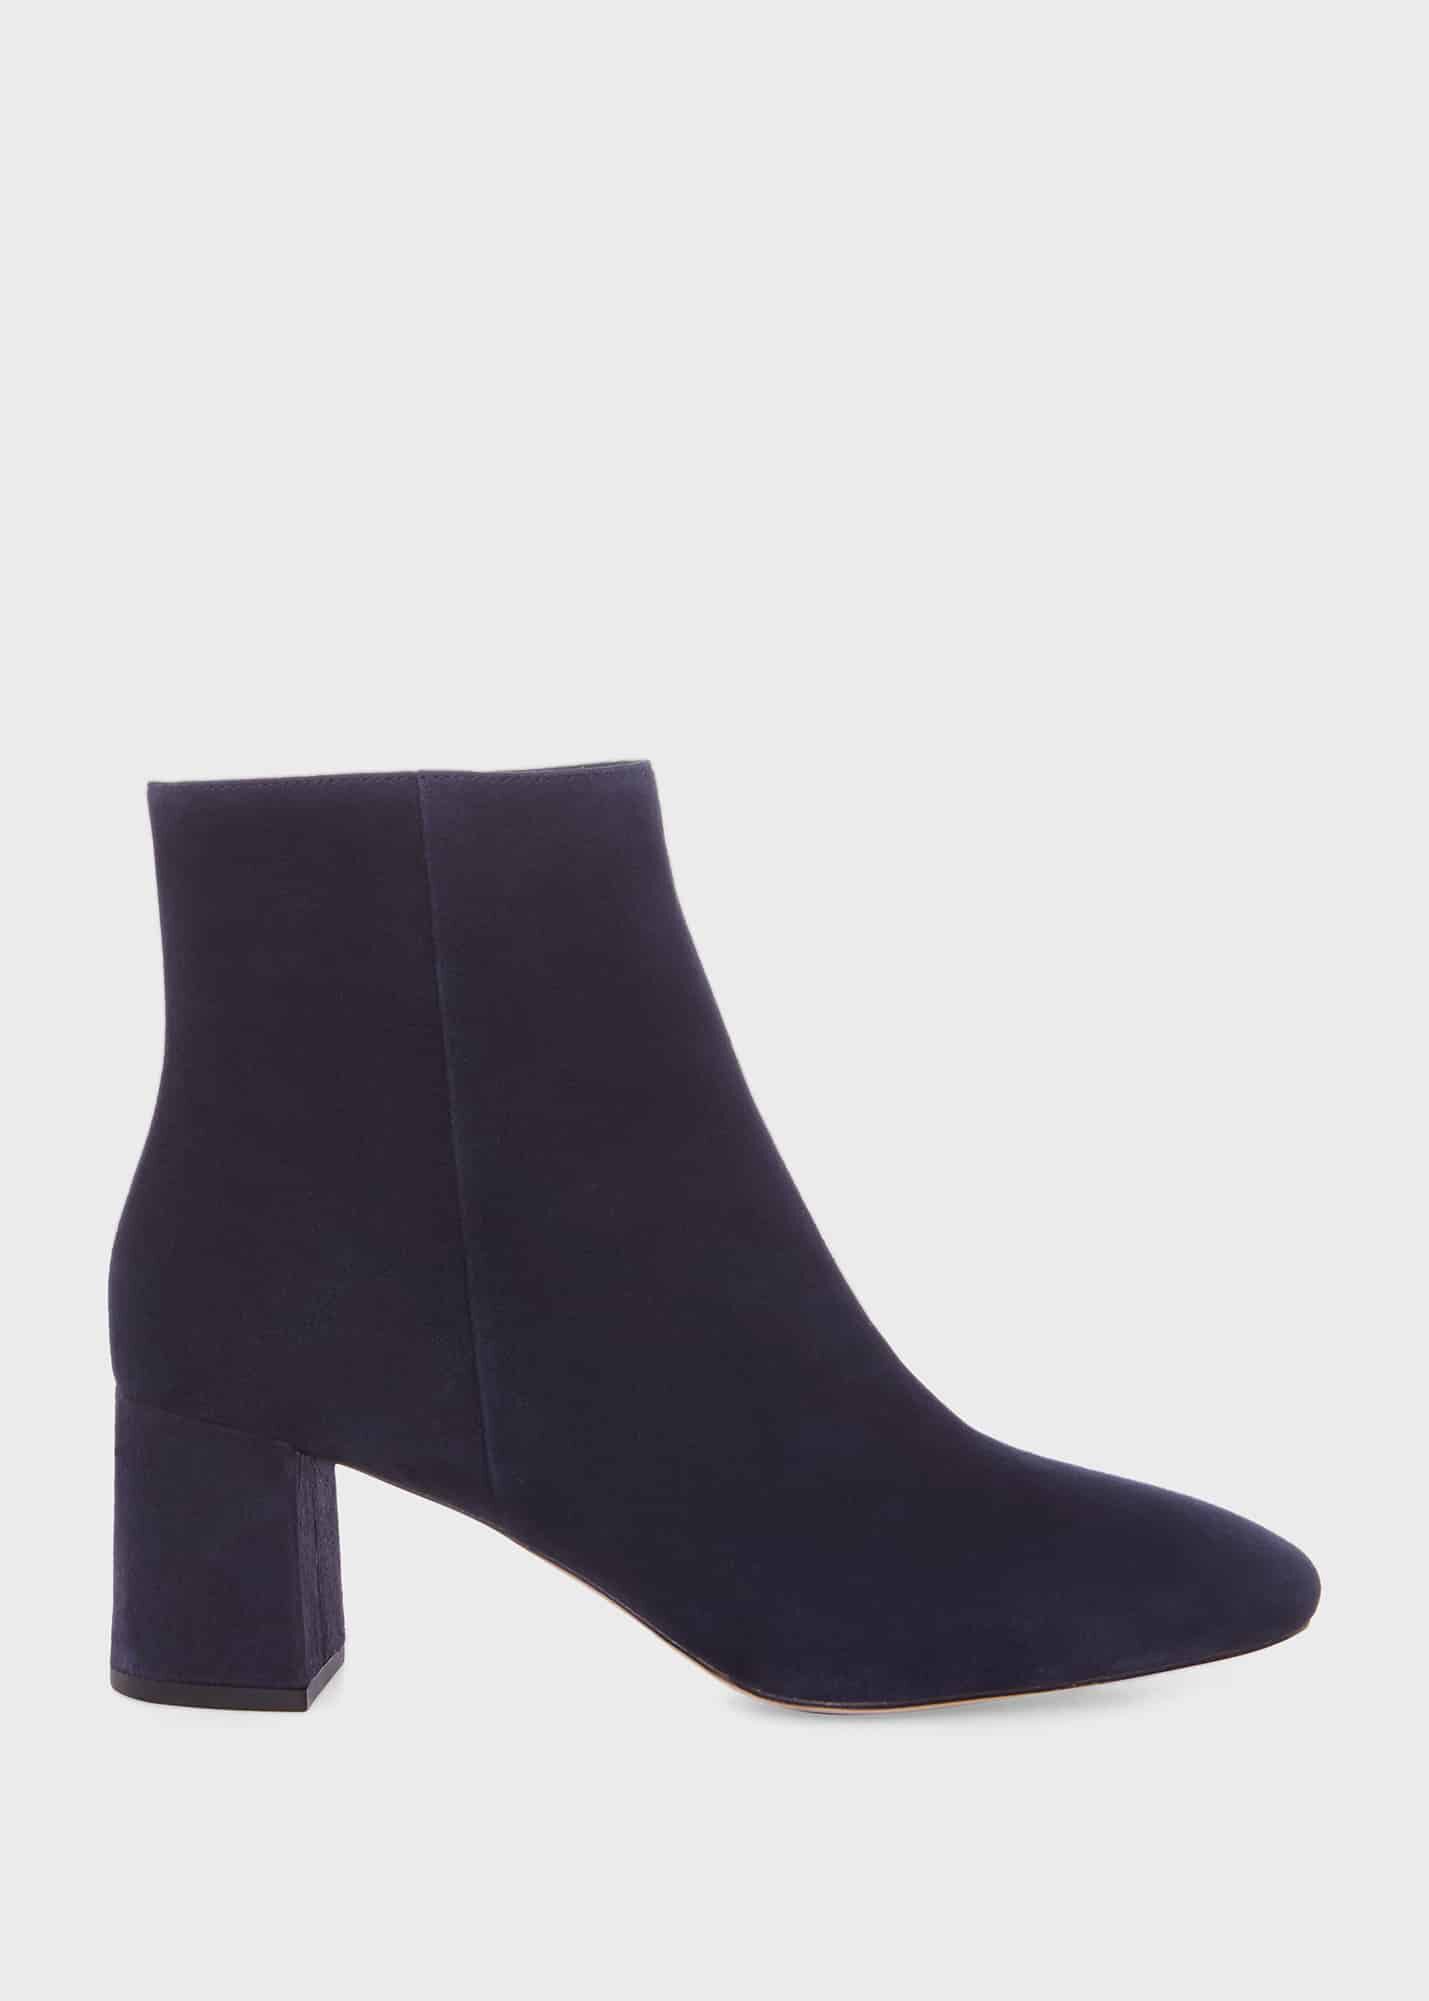 Women's Boots | Ankle Boots, Leather Boots & More | Hobbs London |